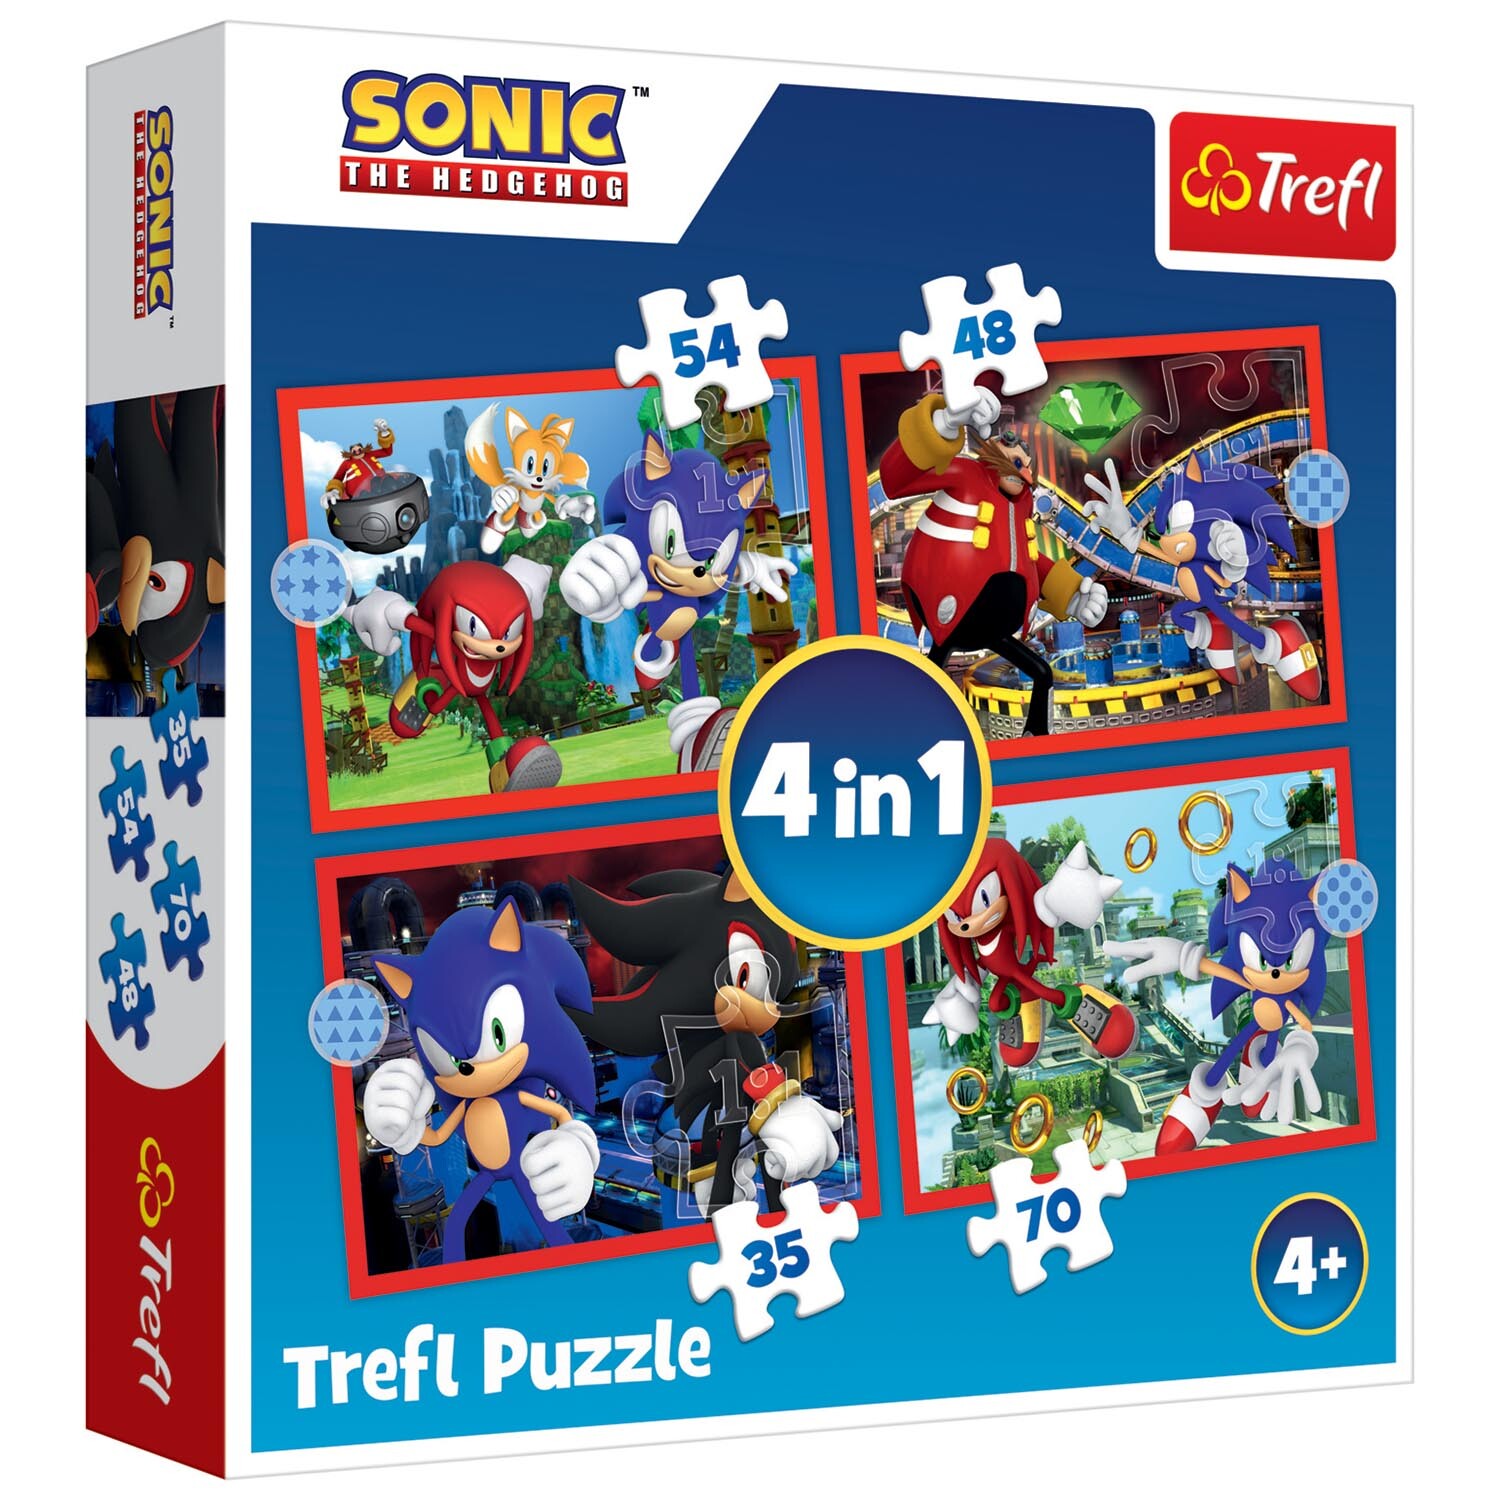 TREFL Sonic The Hedgehog 4 in 1 Puzzles Image